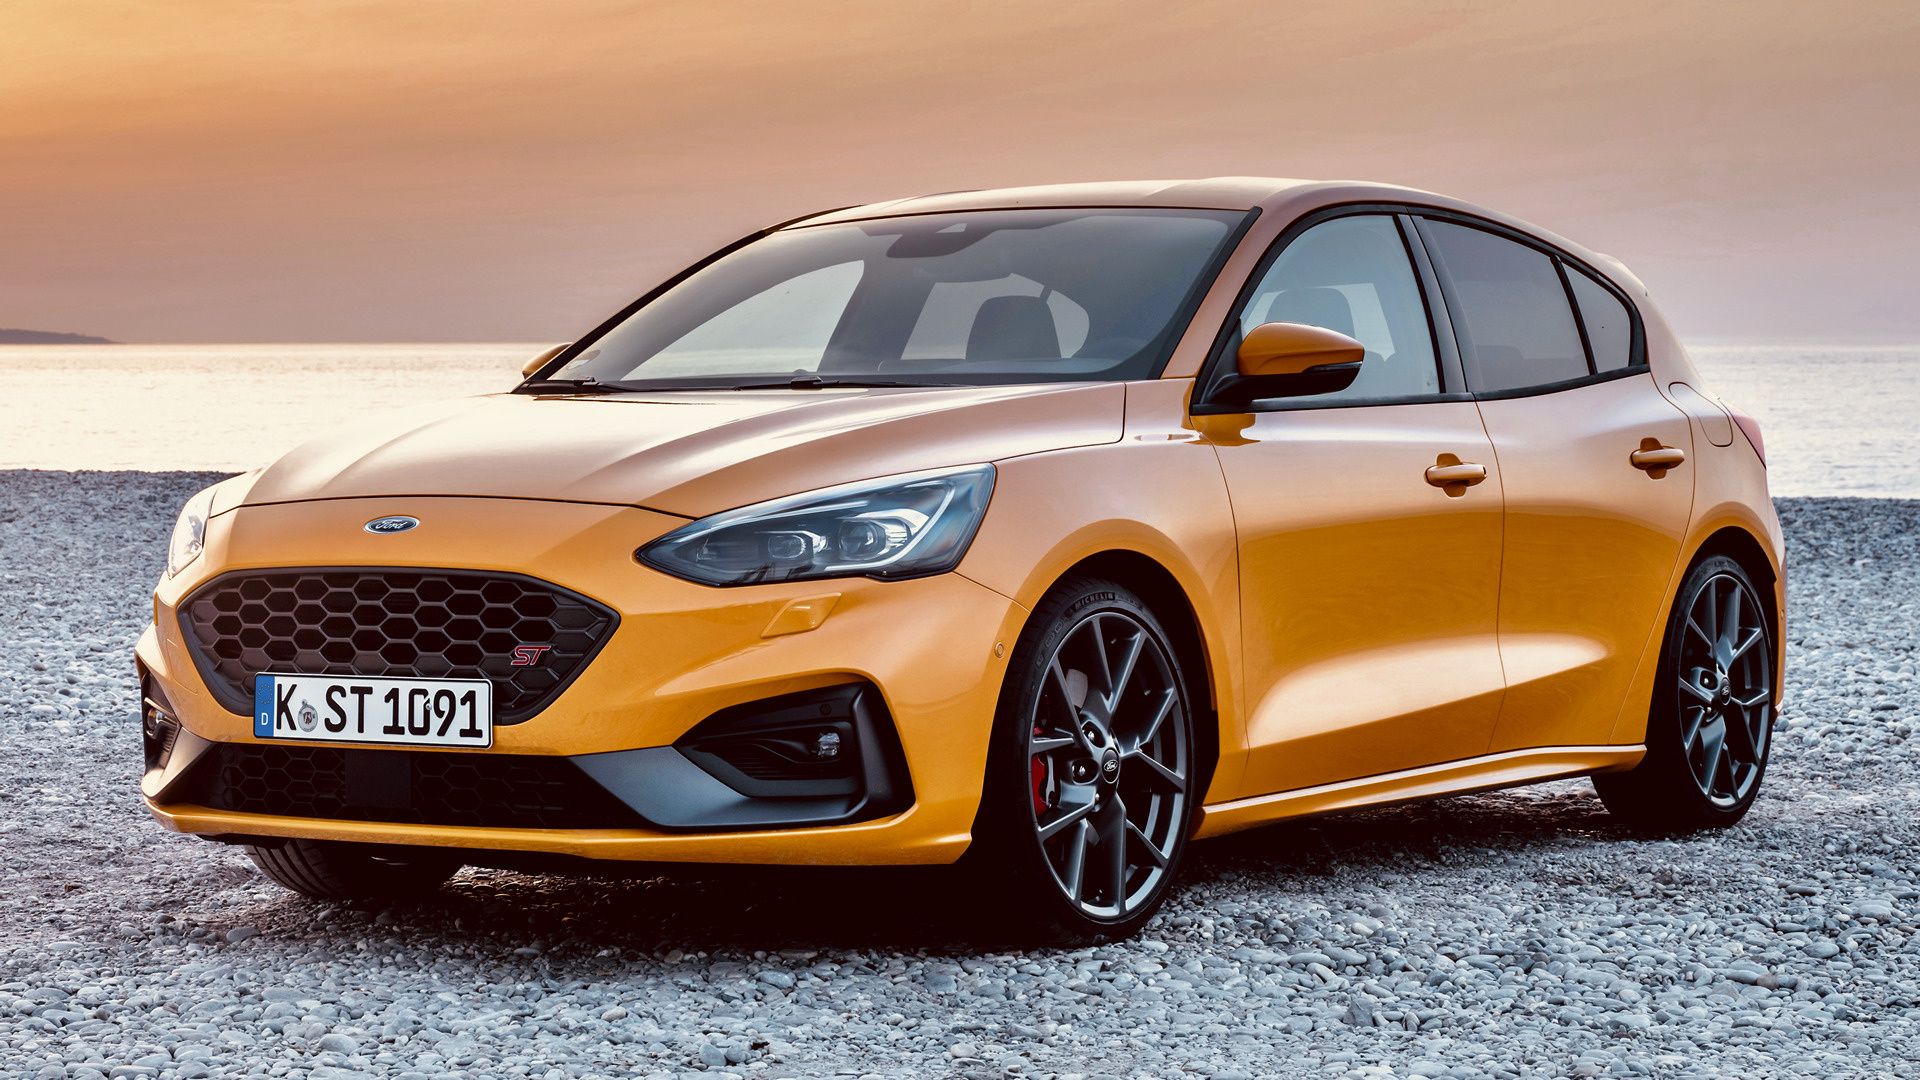 Ford Focus ST and HD Image